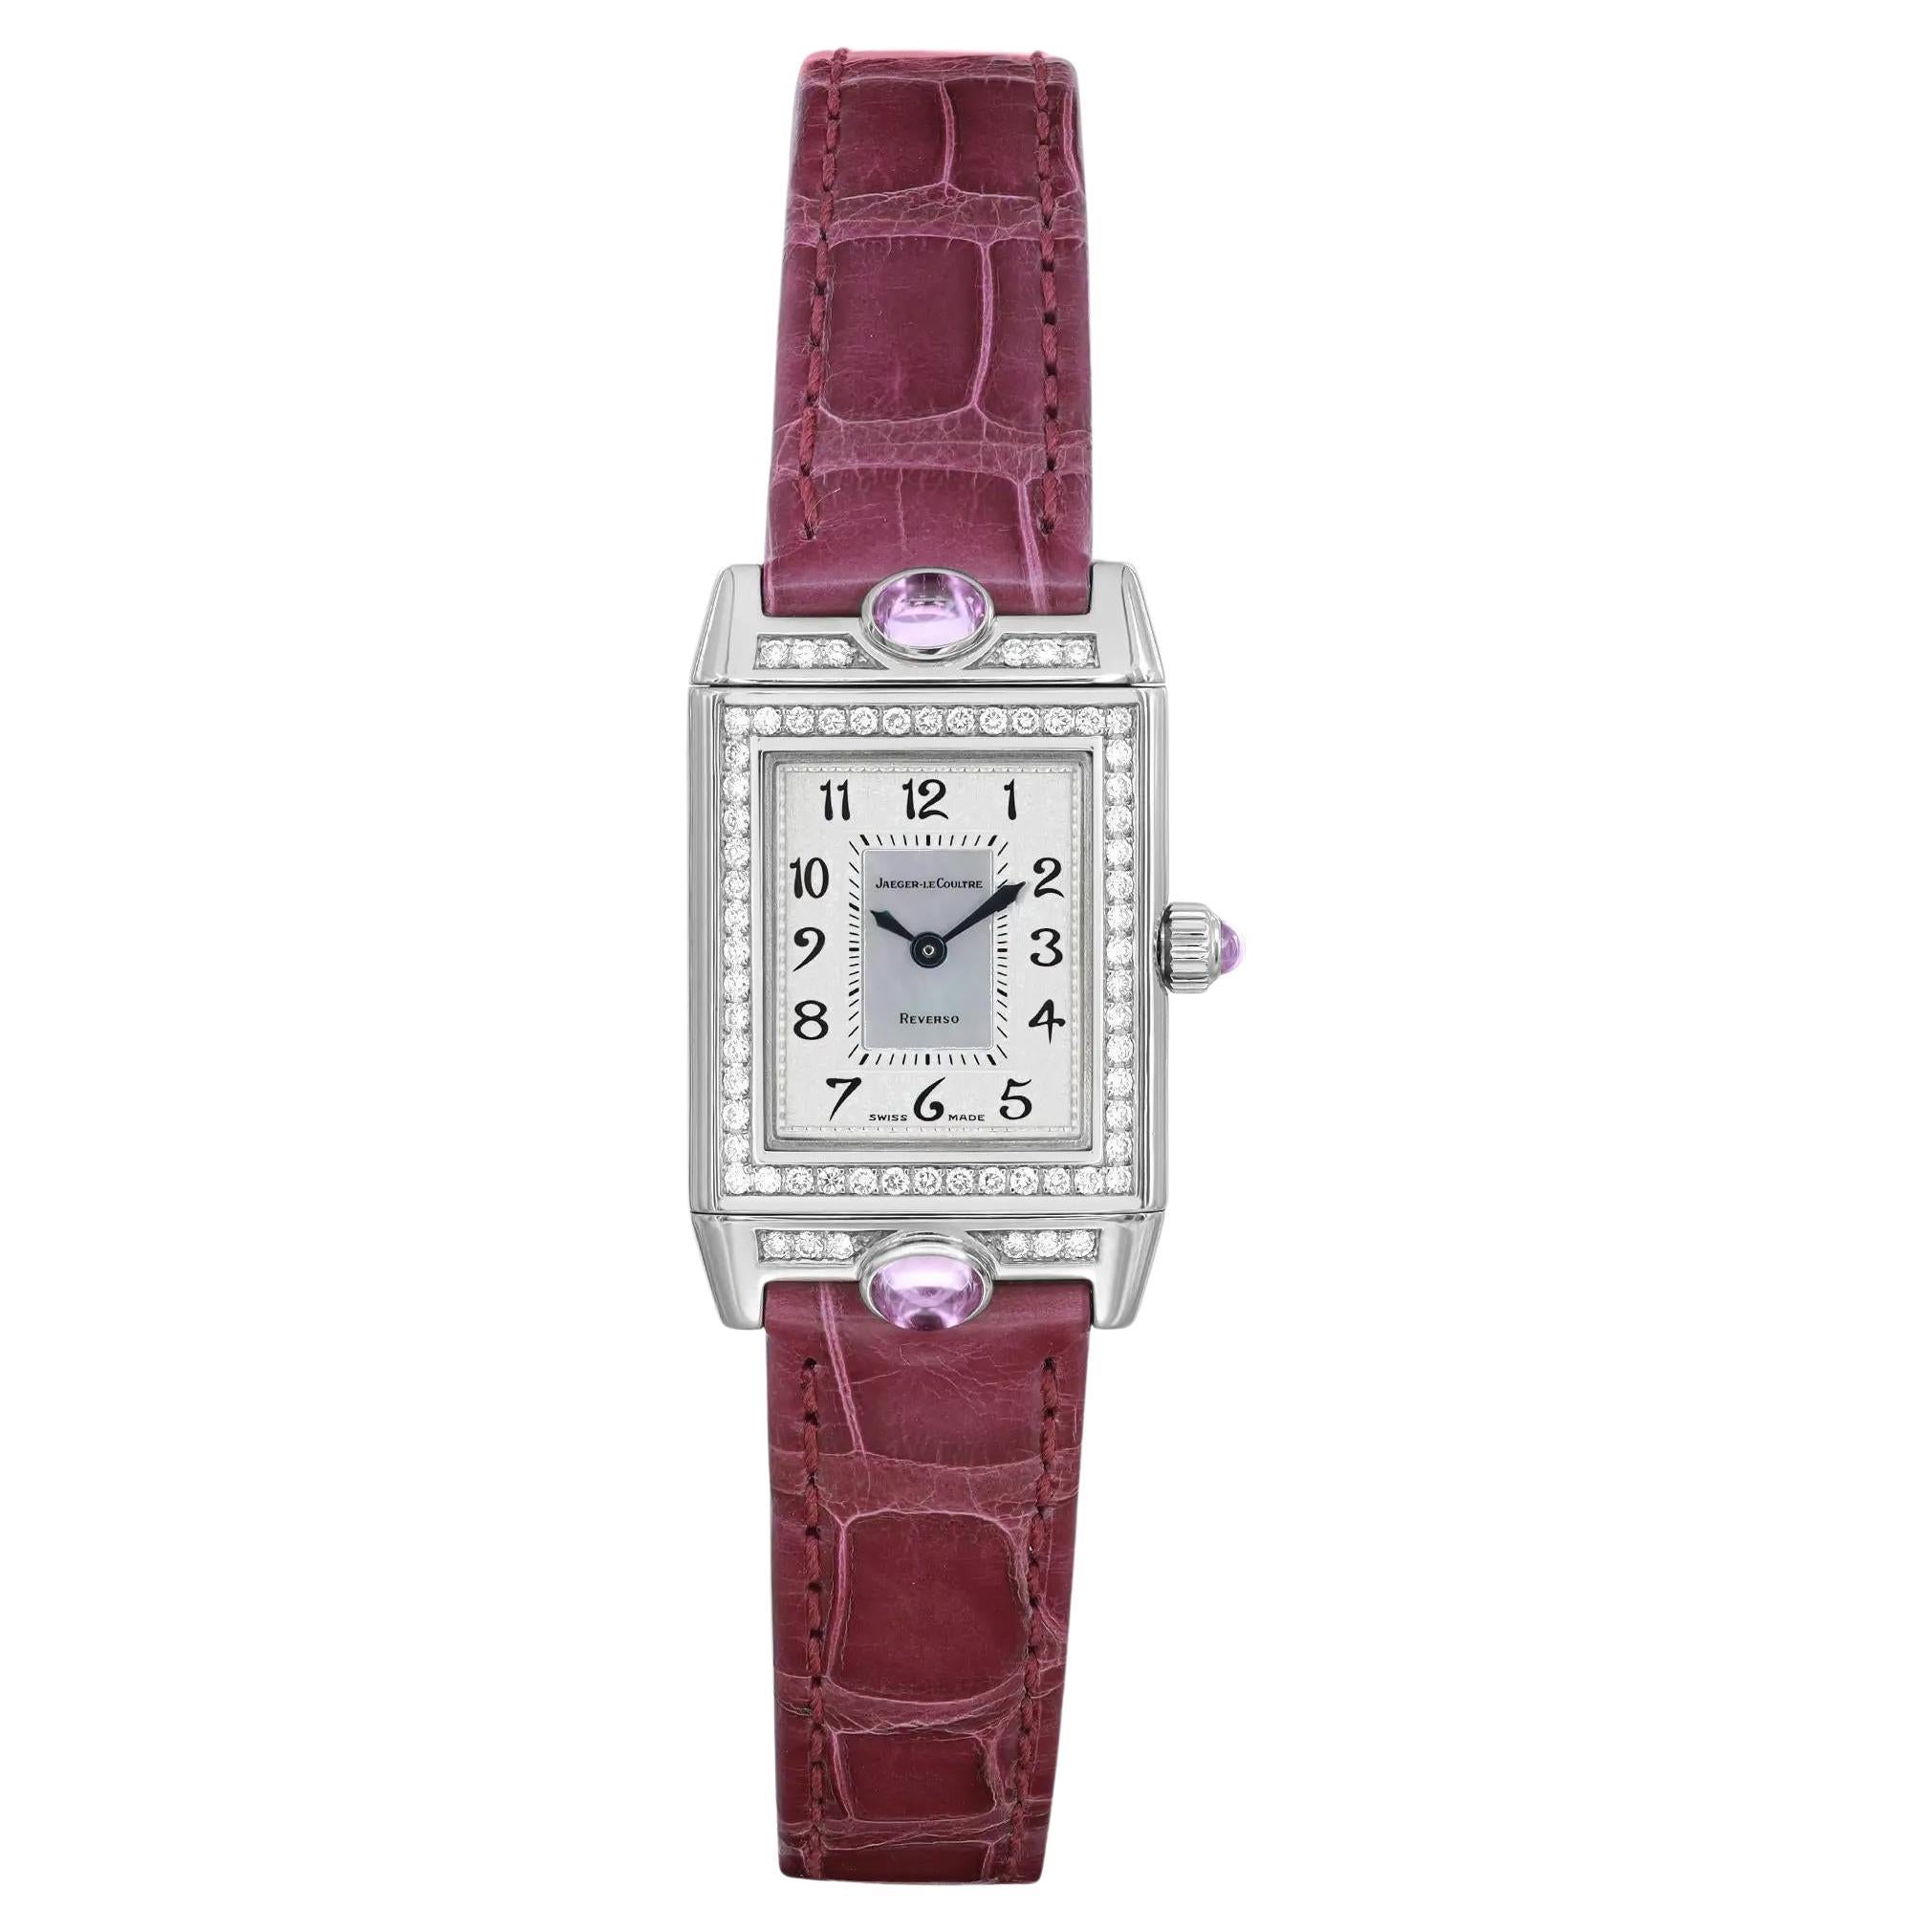 Jeager-LeCoultre Reverso 18k Gold Diamond Gem Stone Silver Dial Watch Q2623402 For Sale